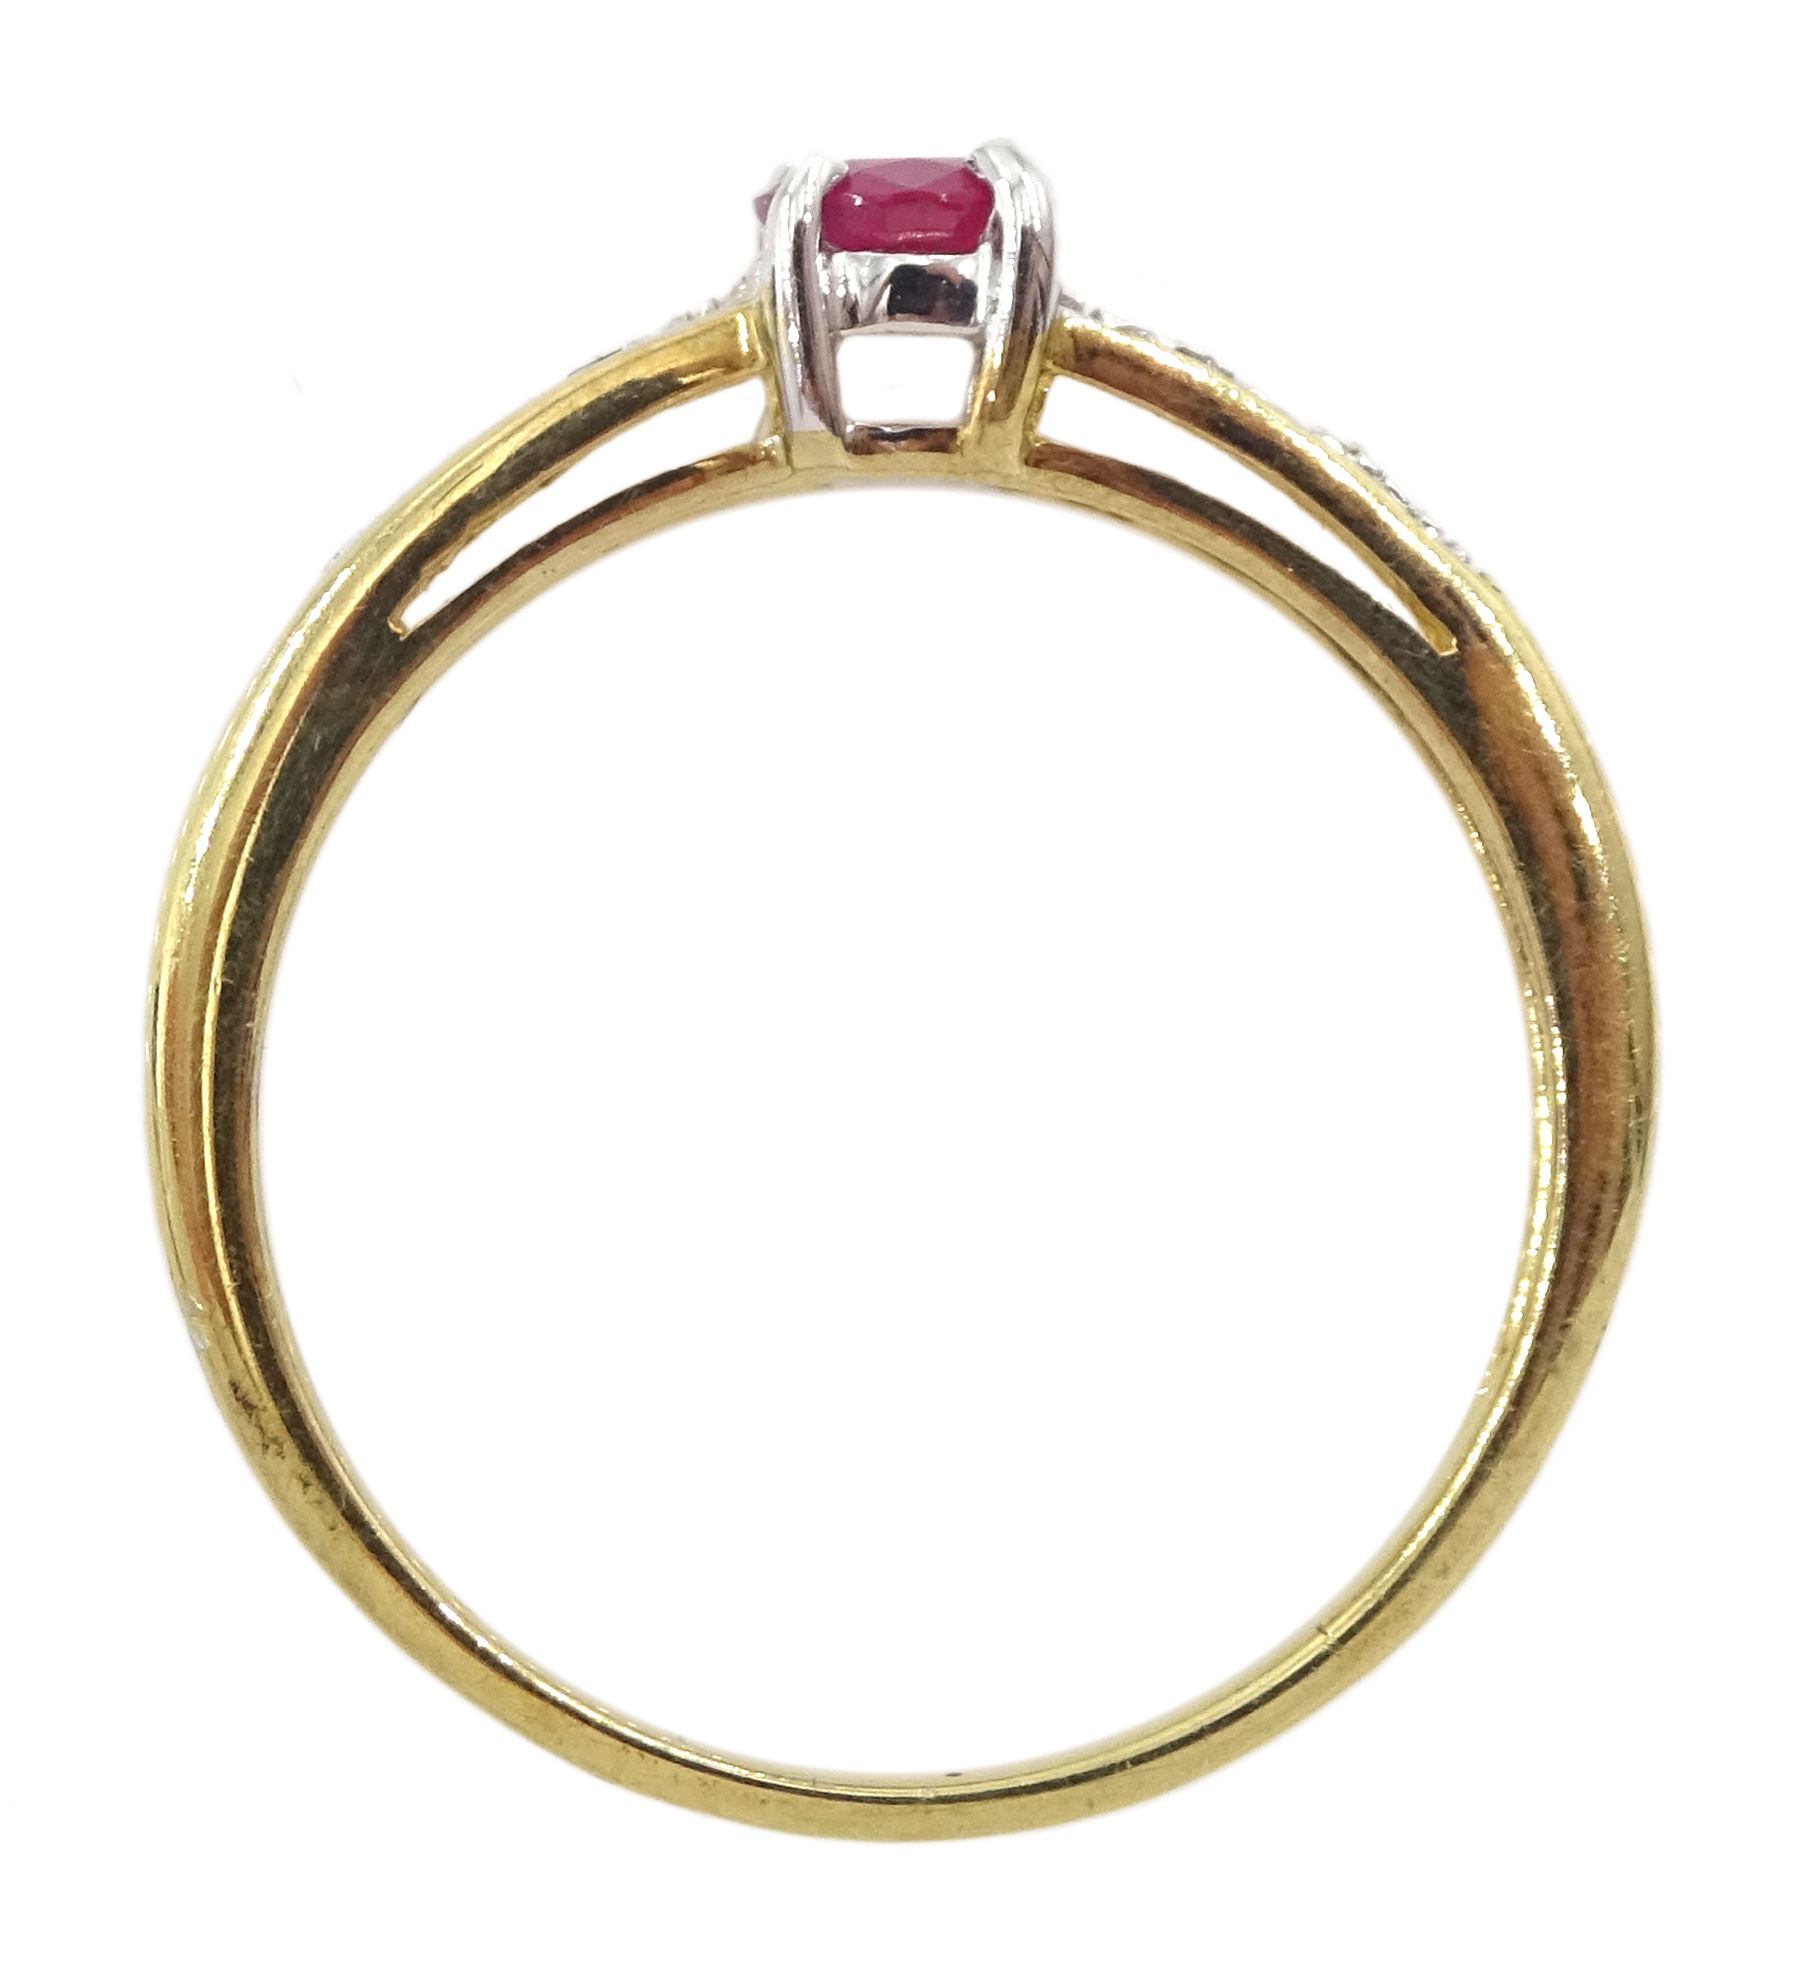 Silver-gilt ruby and diamond ring - Image 3 of 4